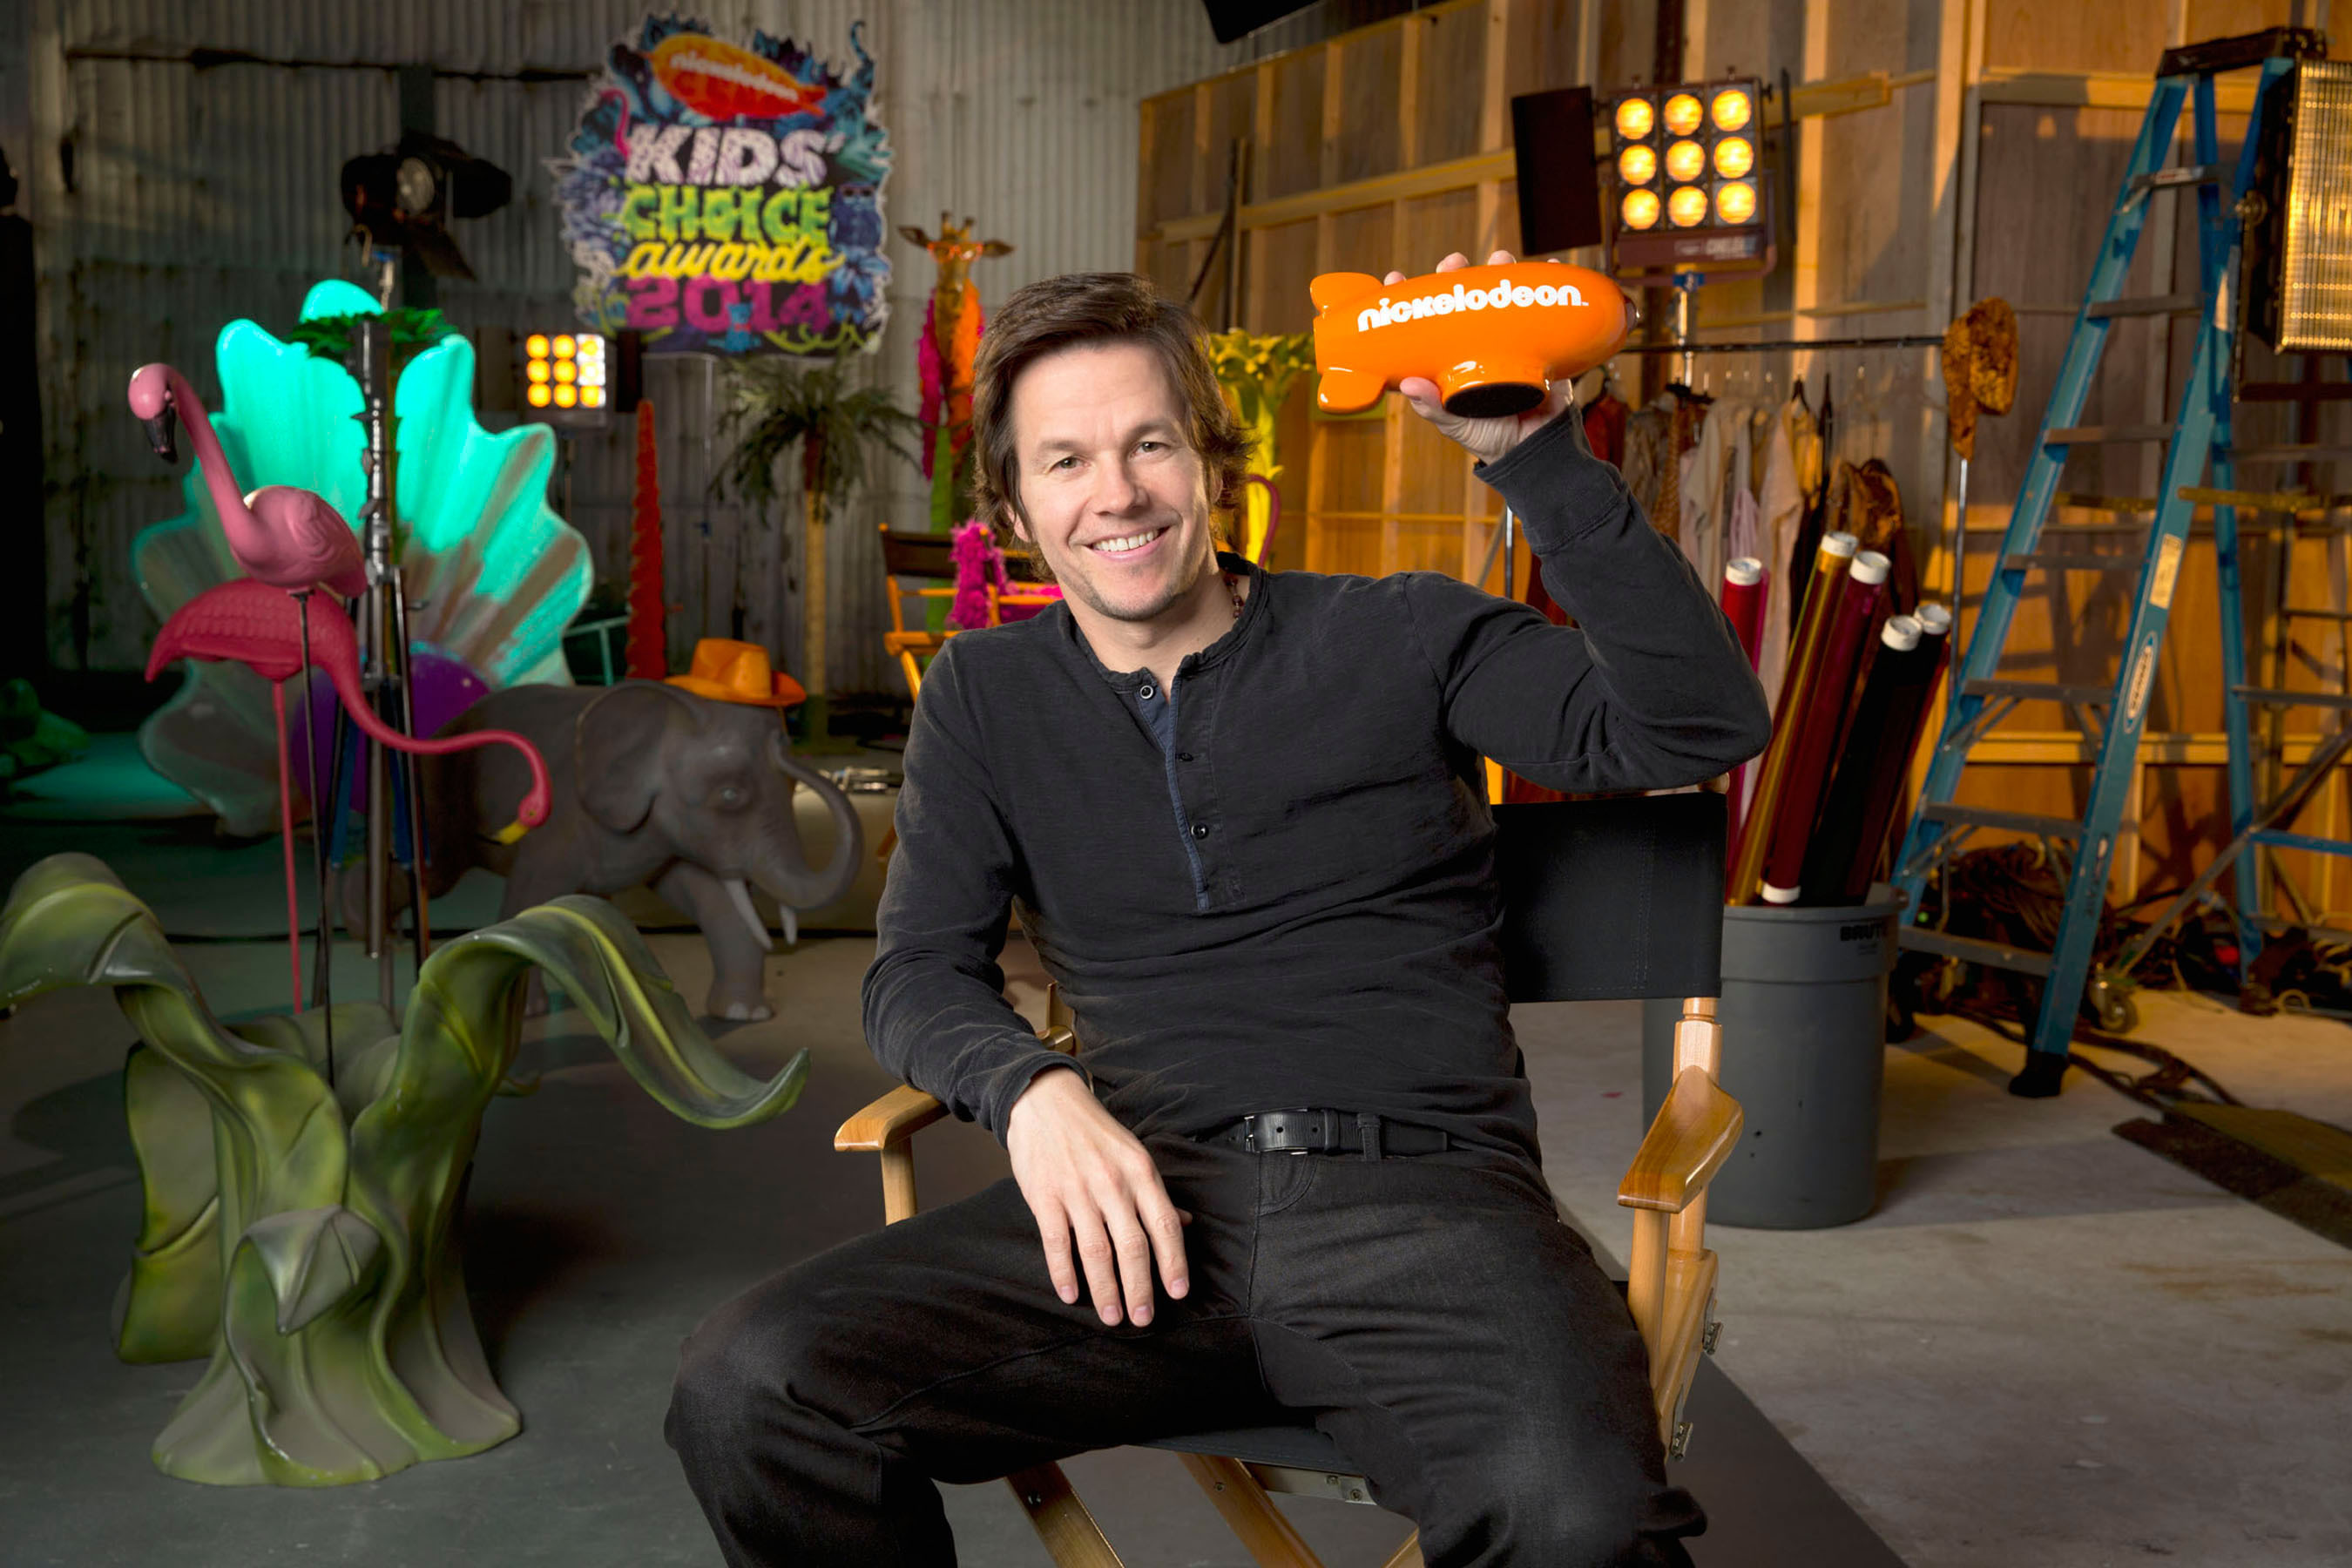 Hollywood Superstar Mark Wahlberg Set To Host Nickelodeon's 27th Annual Kids' Choice Awards. (PRNewsFoto/Nickelodeon) (PRNewsFoto/NICKELODEON)